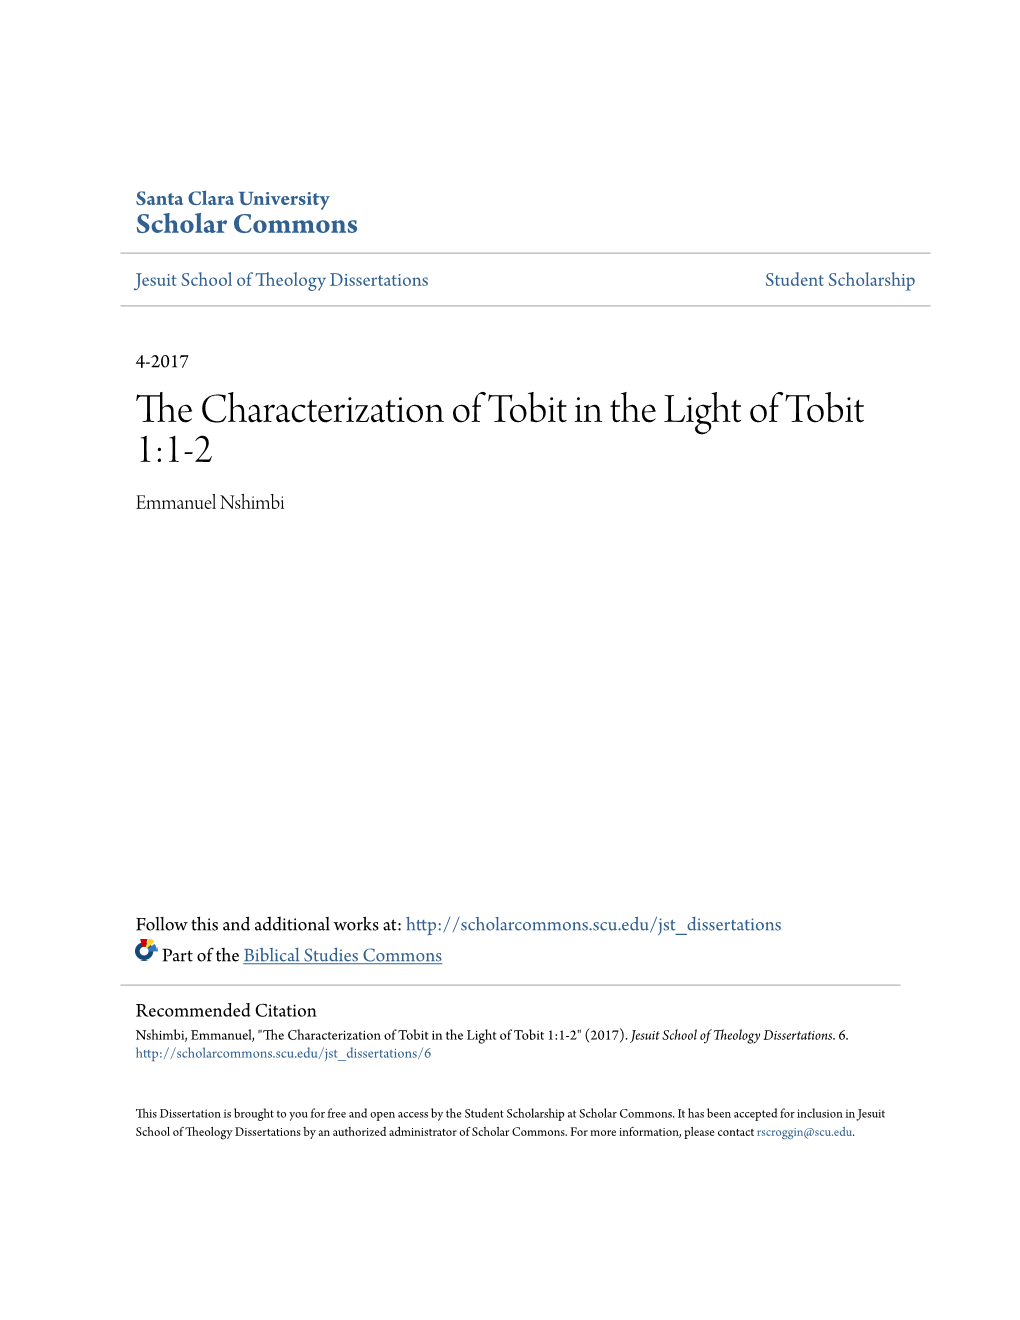 The Characterization of Tobit in the Light of Tobit 1:1-2